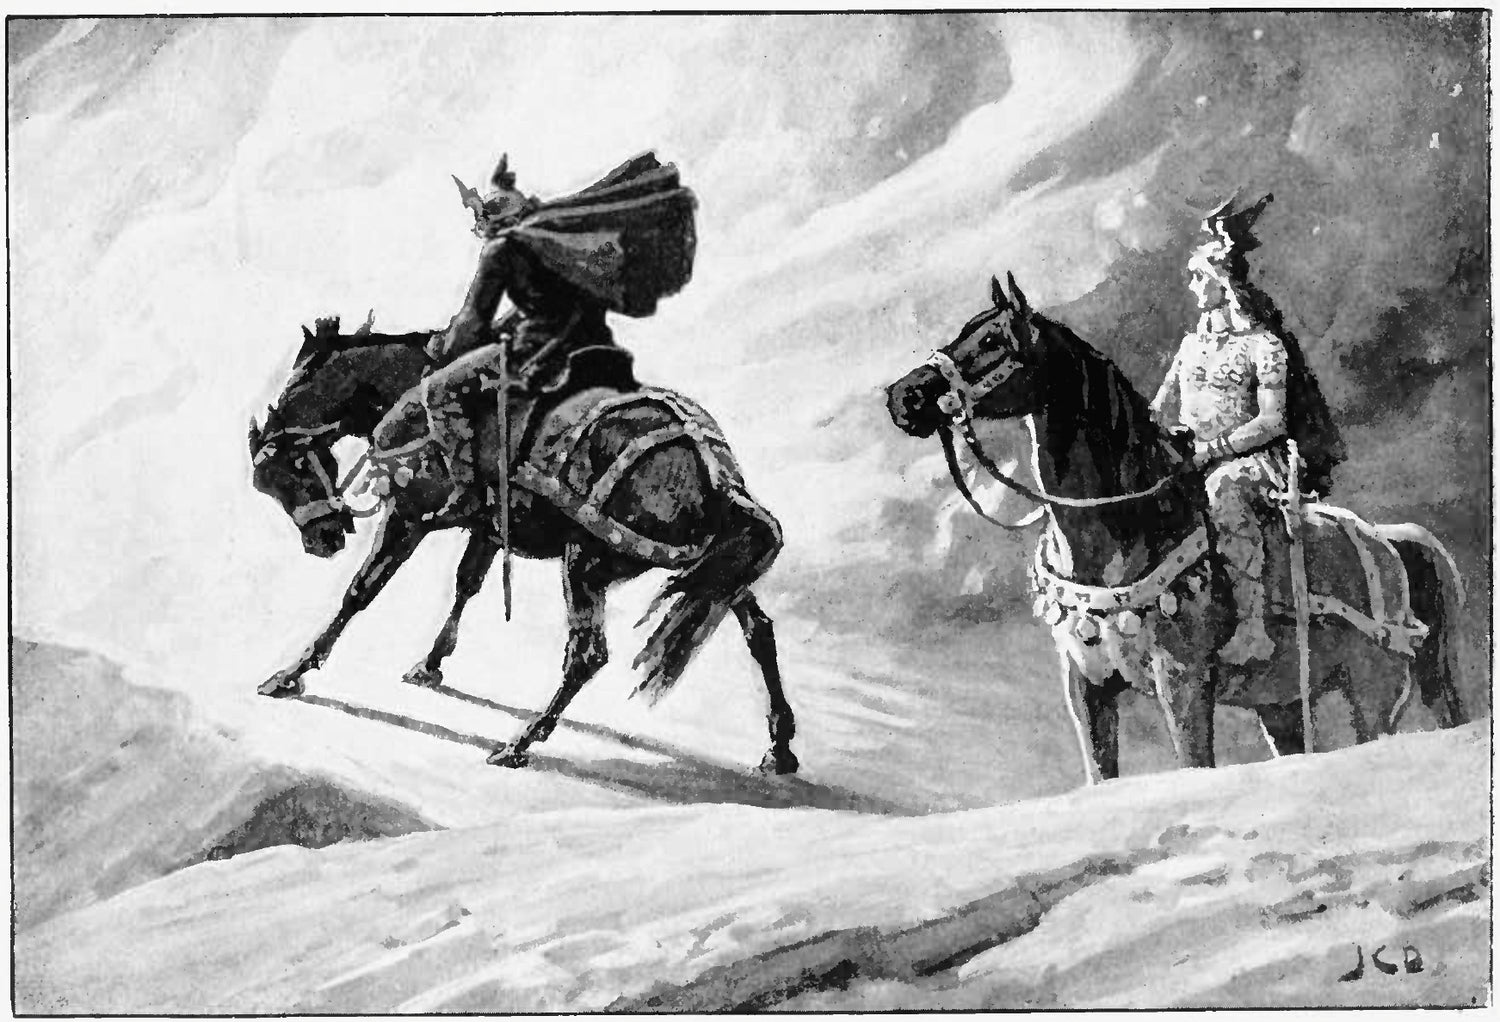 Gunnar's horse balking at the fire, retrieved from https://upload.wikimedia.org/wikipedia/commons/4/4f/Sigurd_and_Gunnar_at_the_Fire_by_J._C._Dollman.jpg--Viking Dragon Blogs